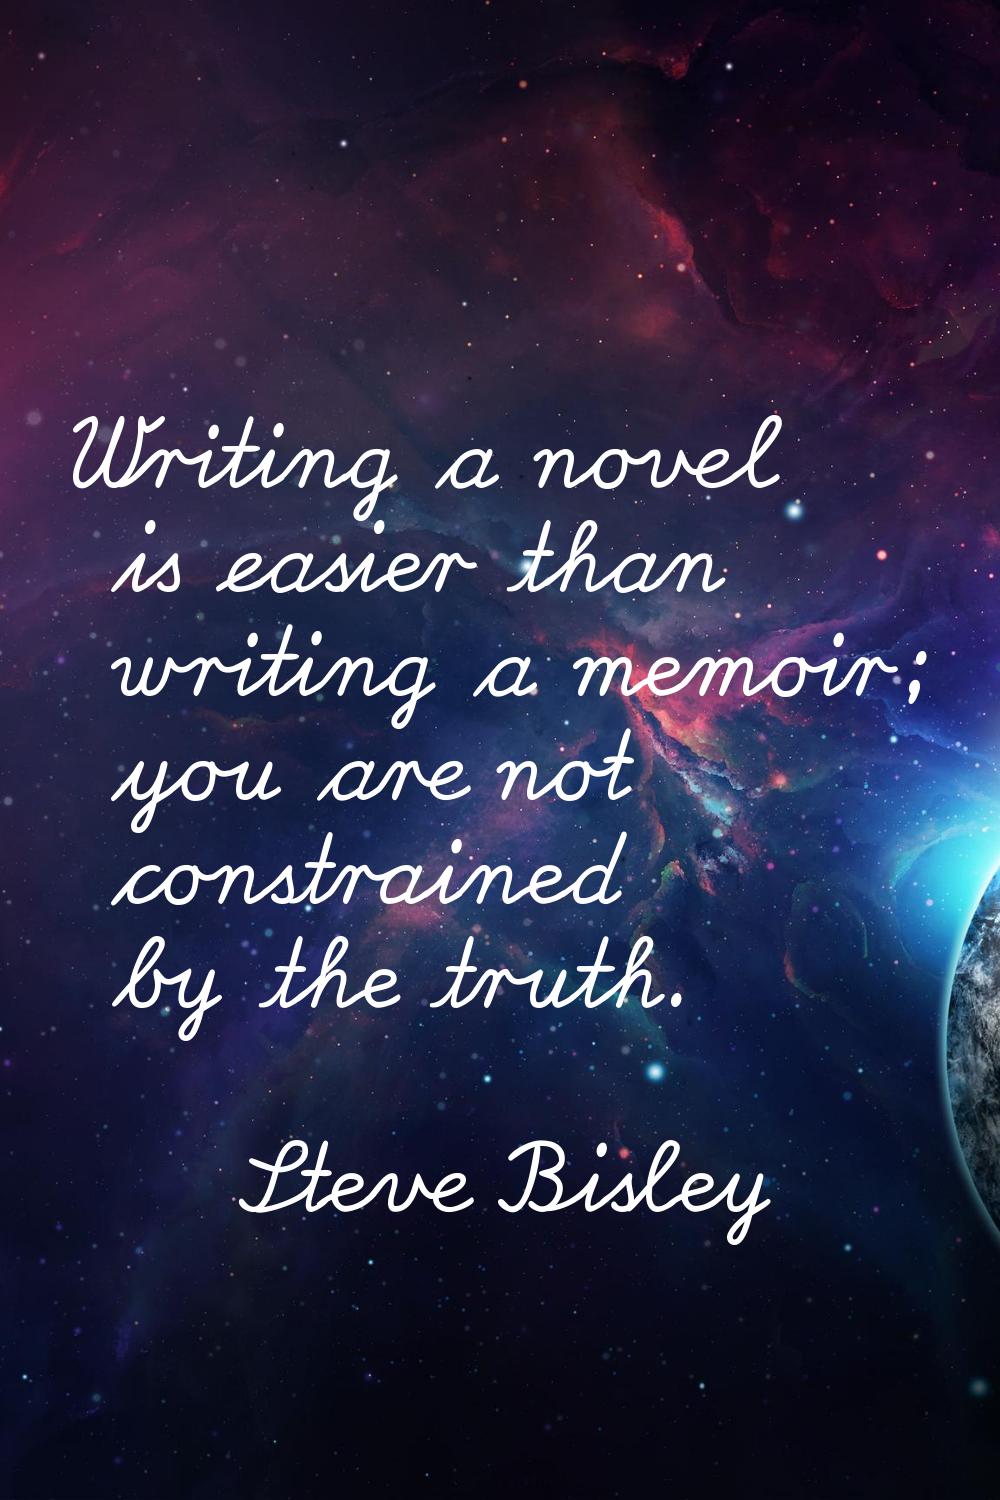 Writing a novel is easier than writing a memoir; you are not constrained by the truth.